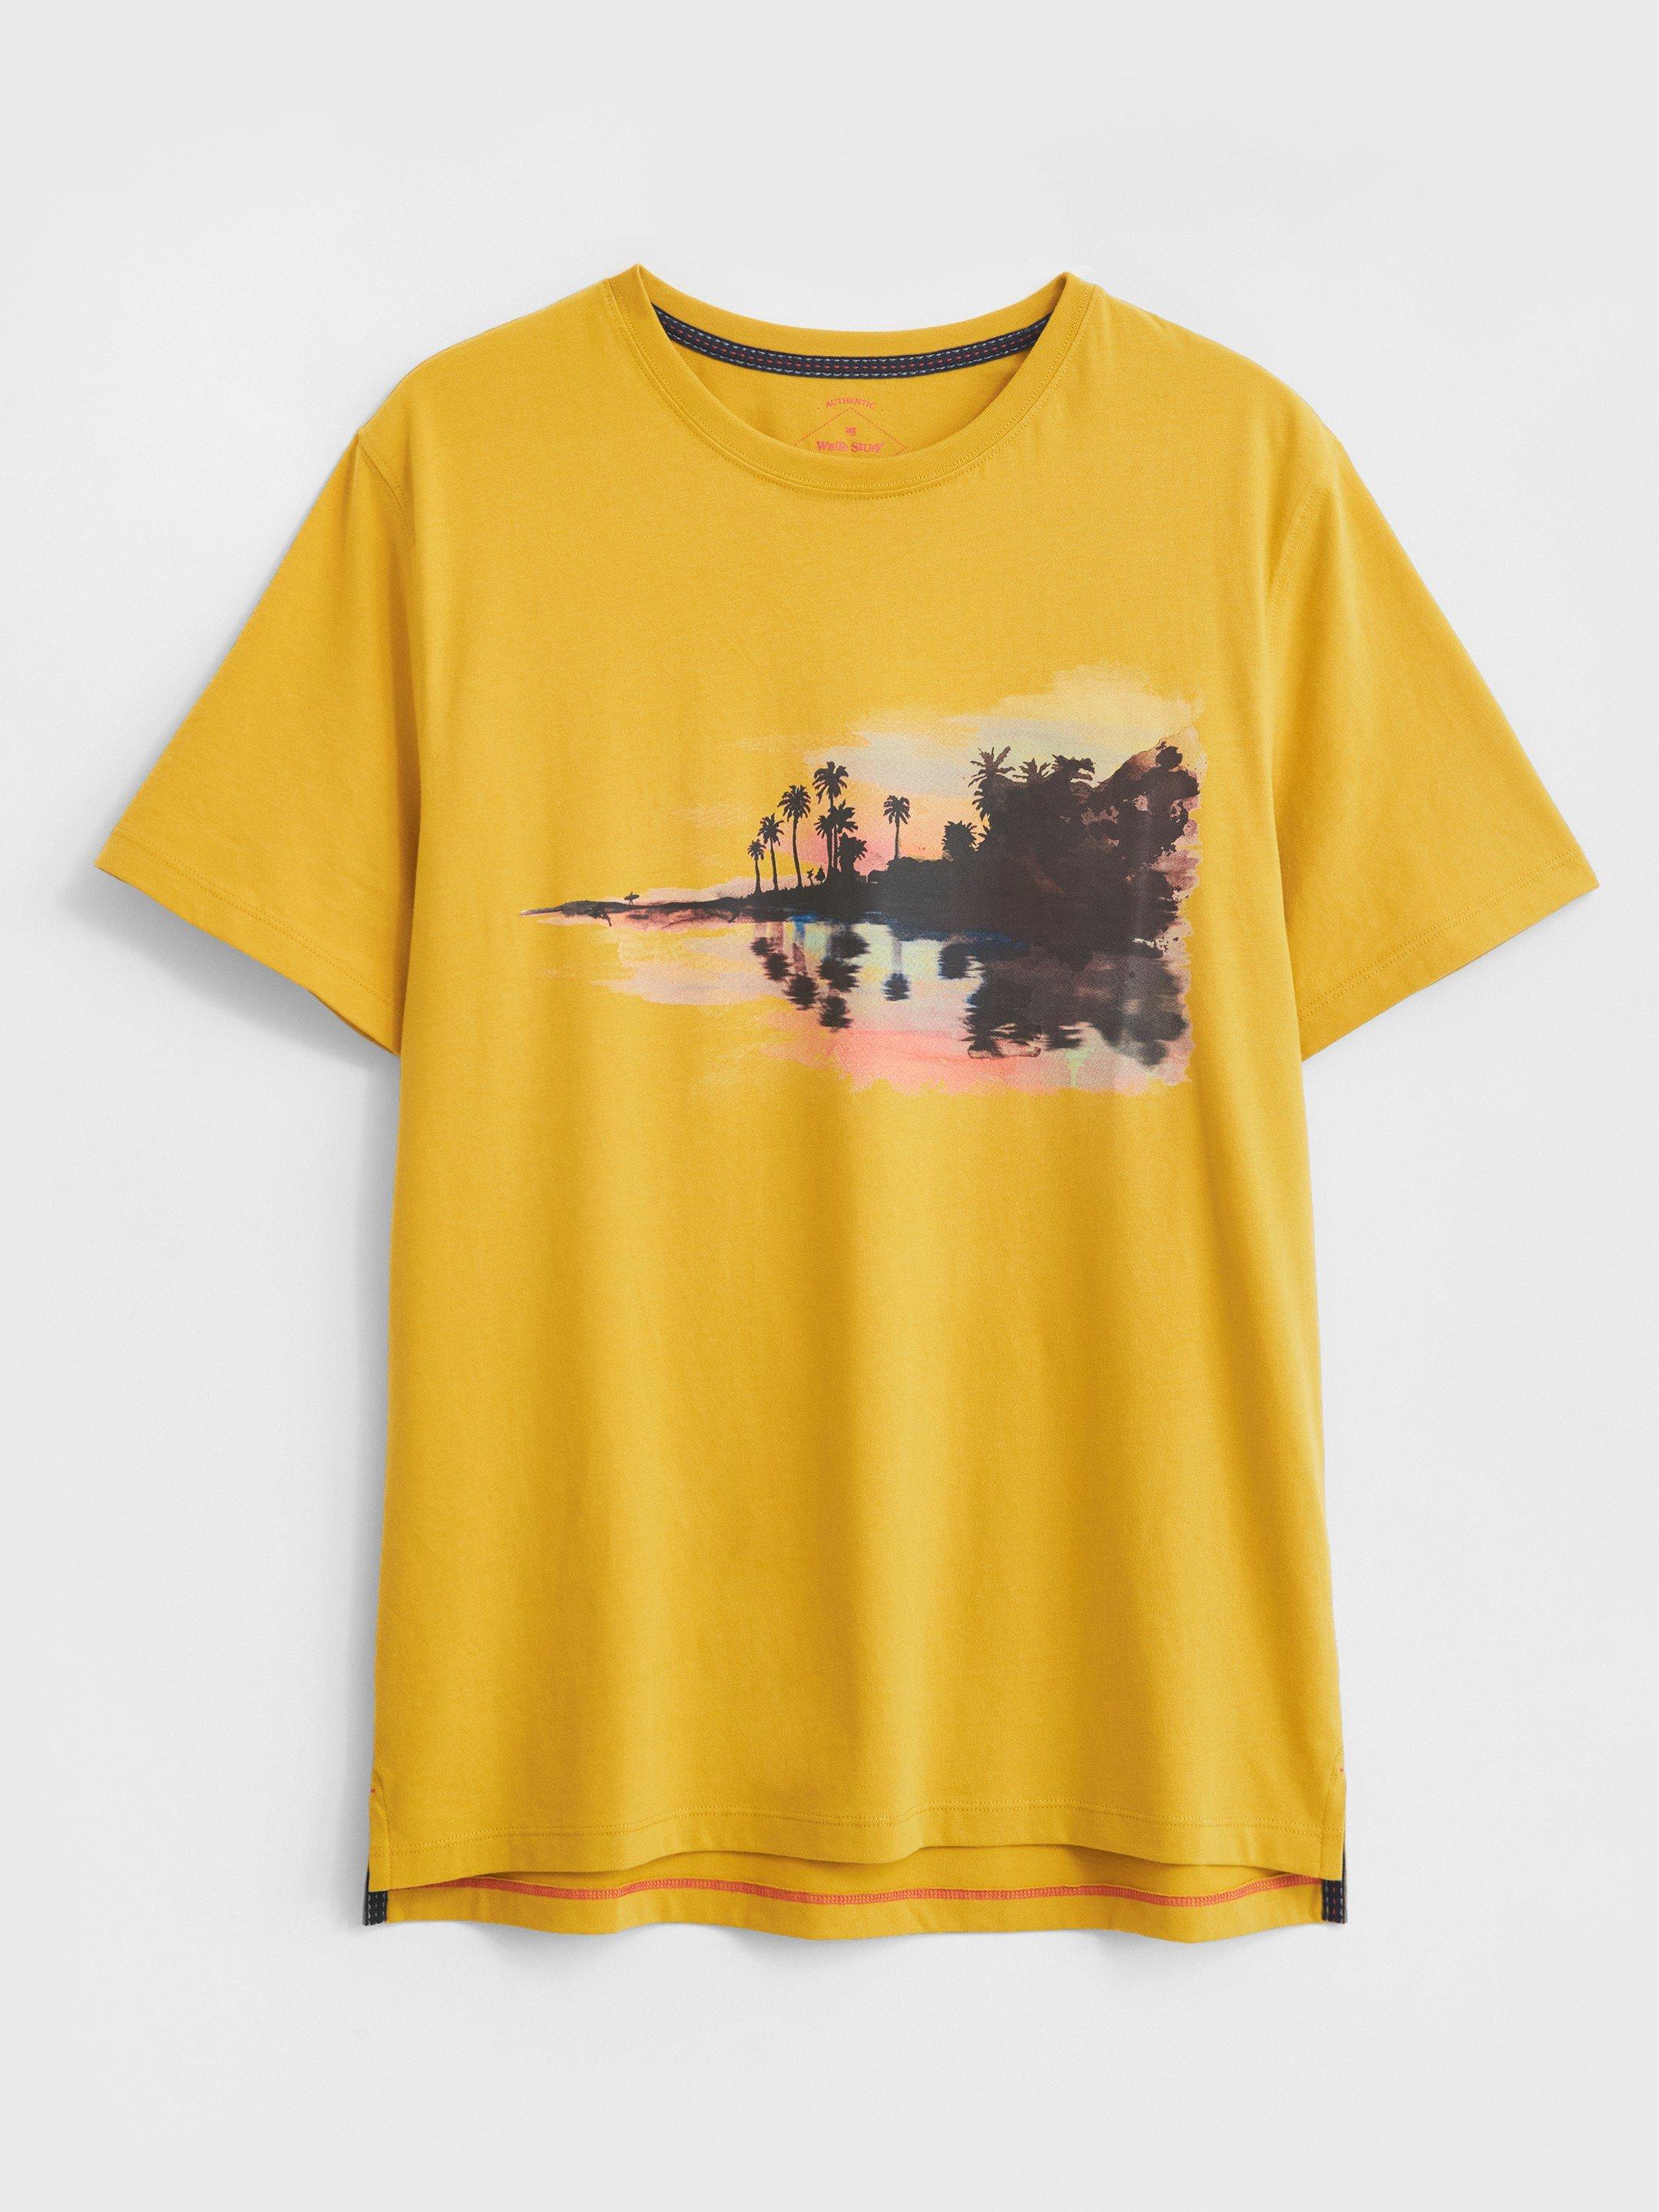 Dip Dye Graphic TShirt in MID YELLOW - FLAT FRONT